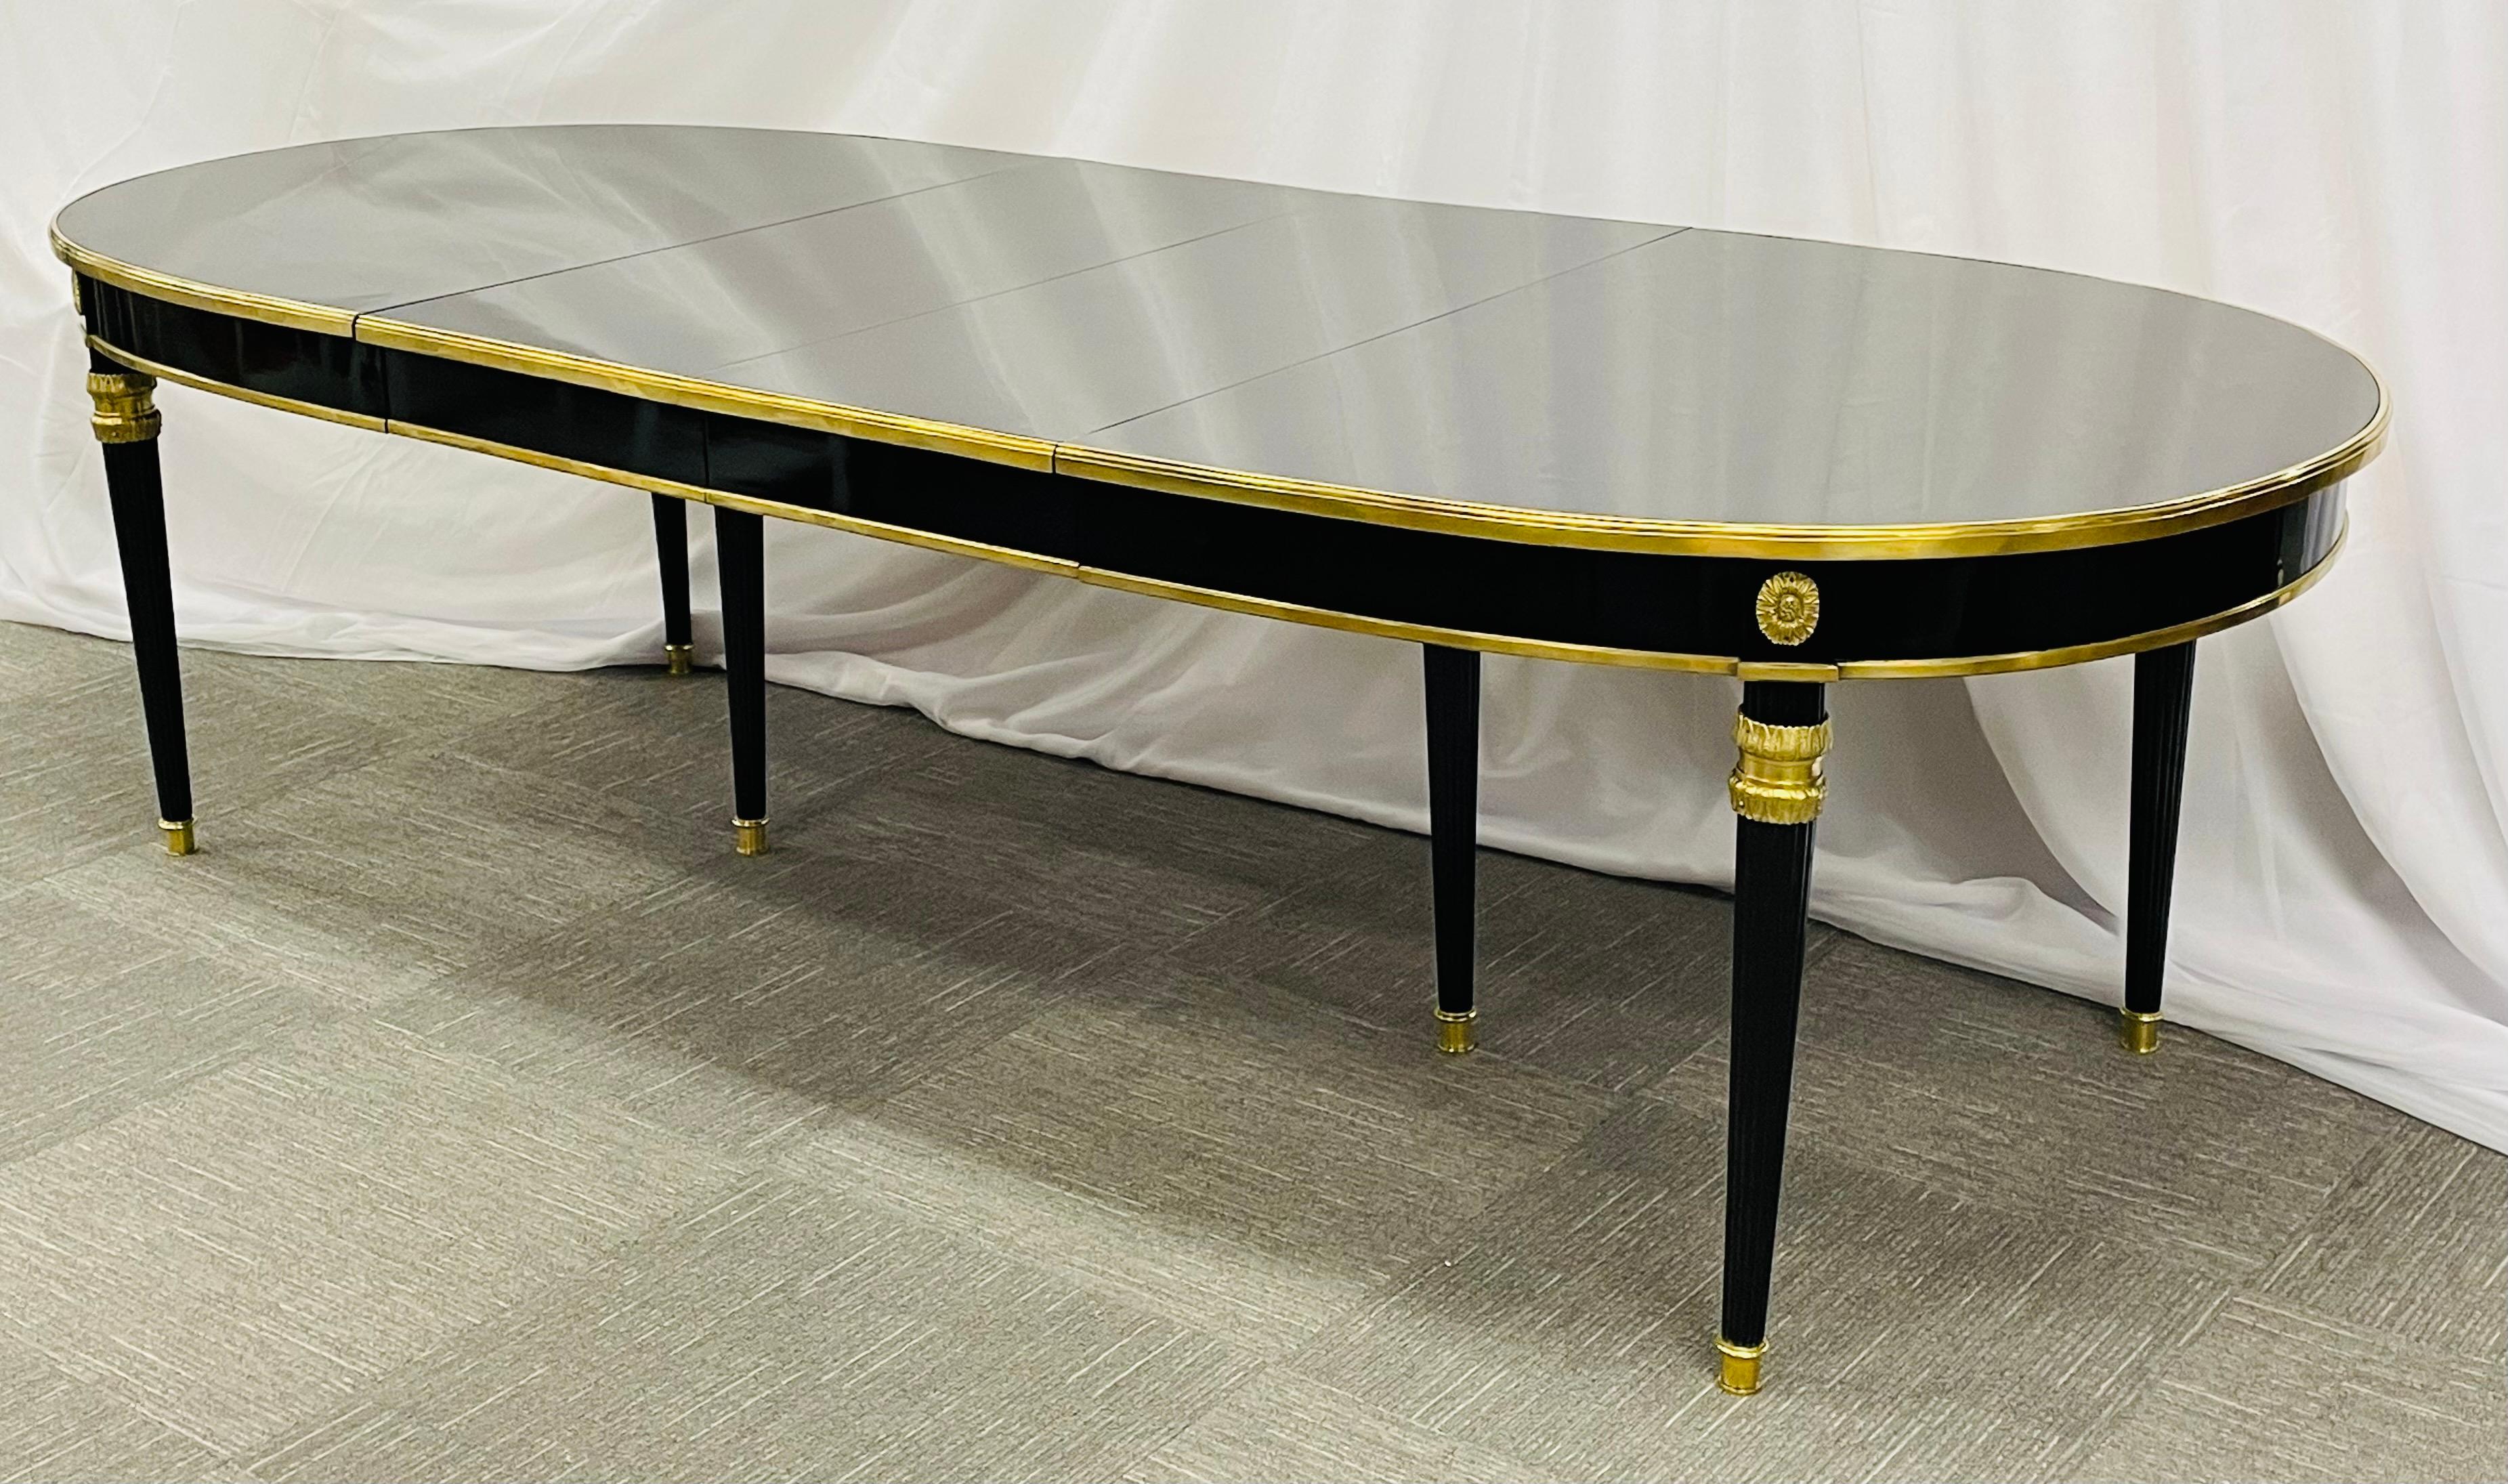 Maison Jansen Ebony Dining Table. Louis XVI Style 2 Leaves In Good Condition For Sale In Stamford, CT